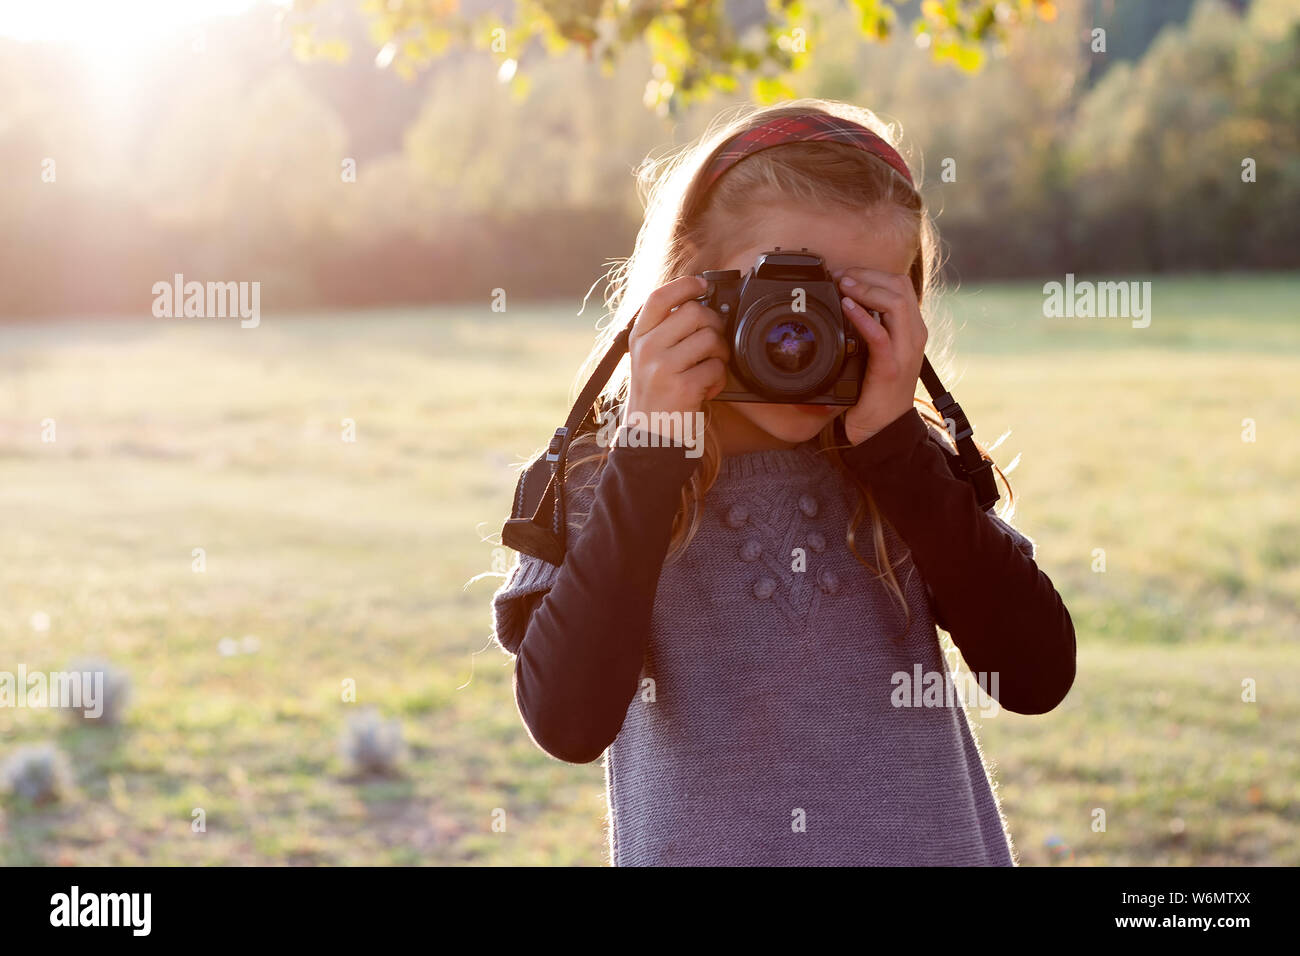 Portrait of a young girl, holding a photo camera Stock Photo